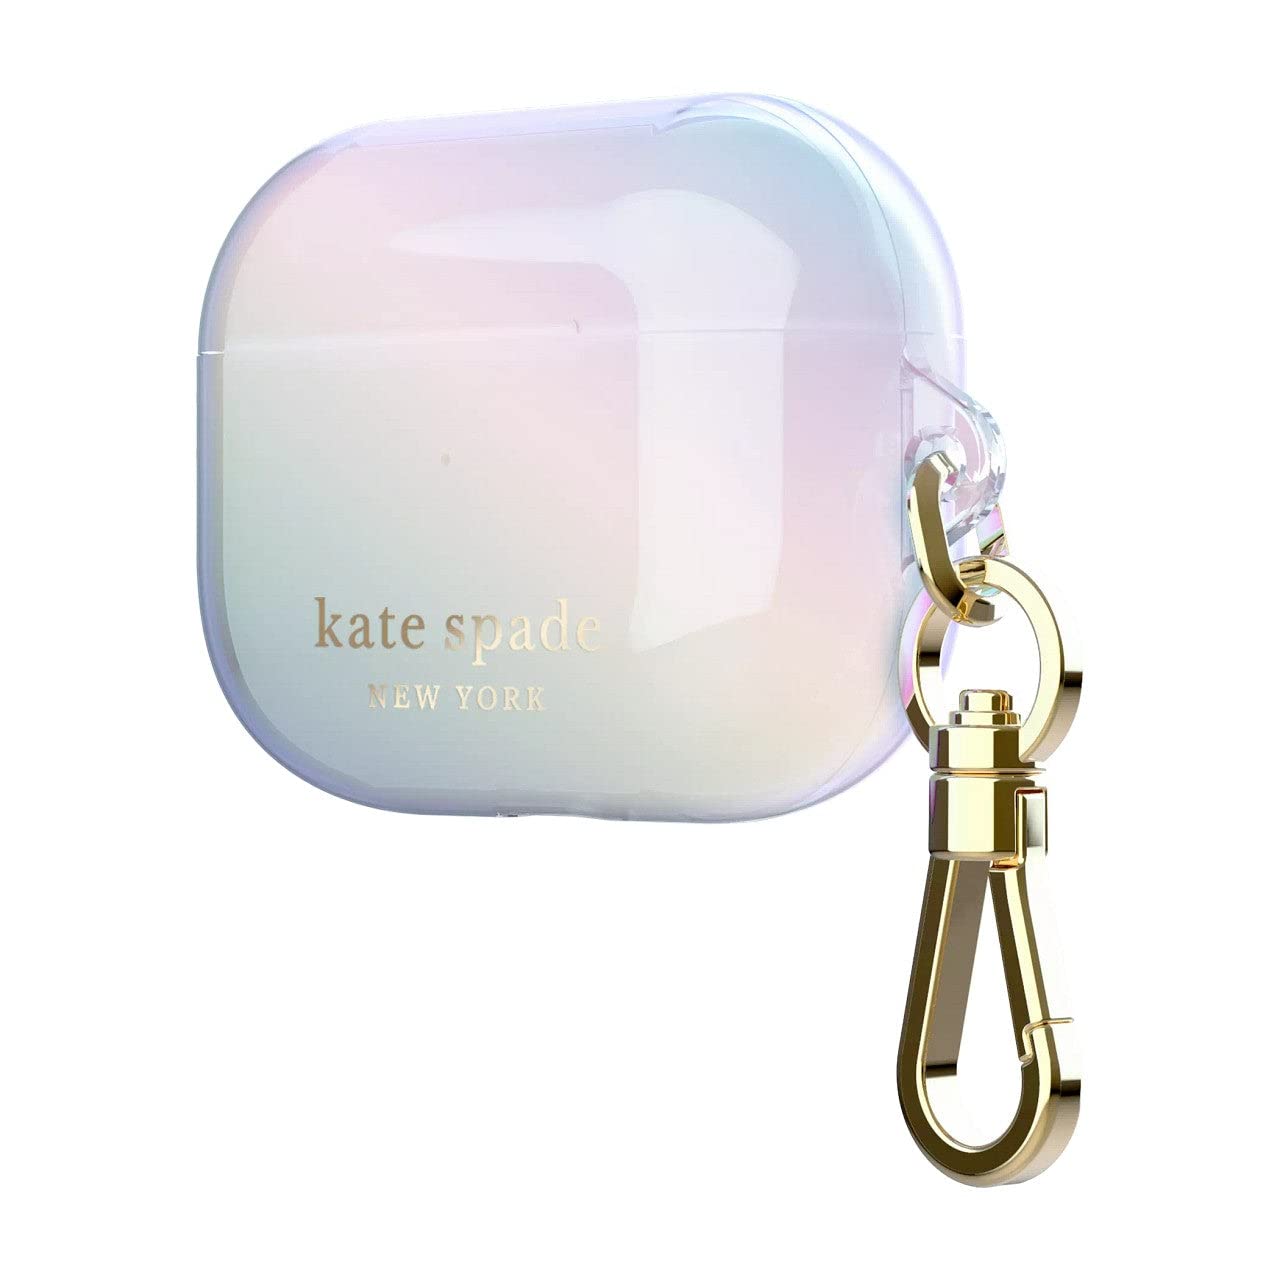 Kate Spade New York Protective Case for AirPods Pro - Iridescent